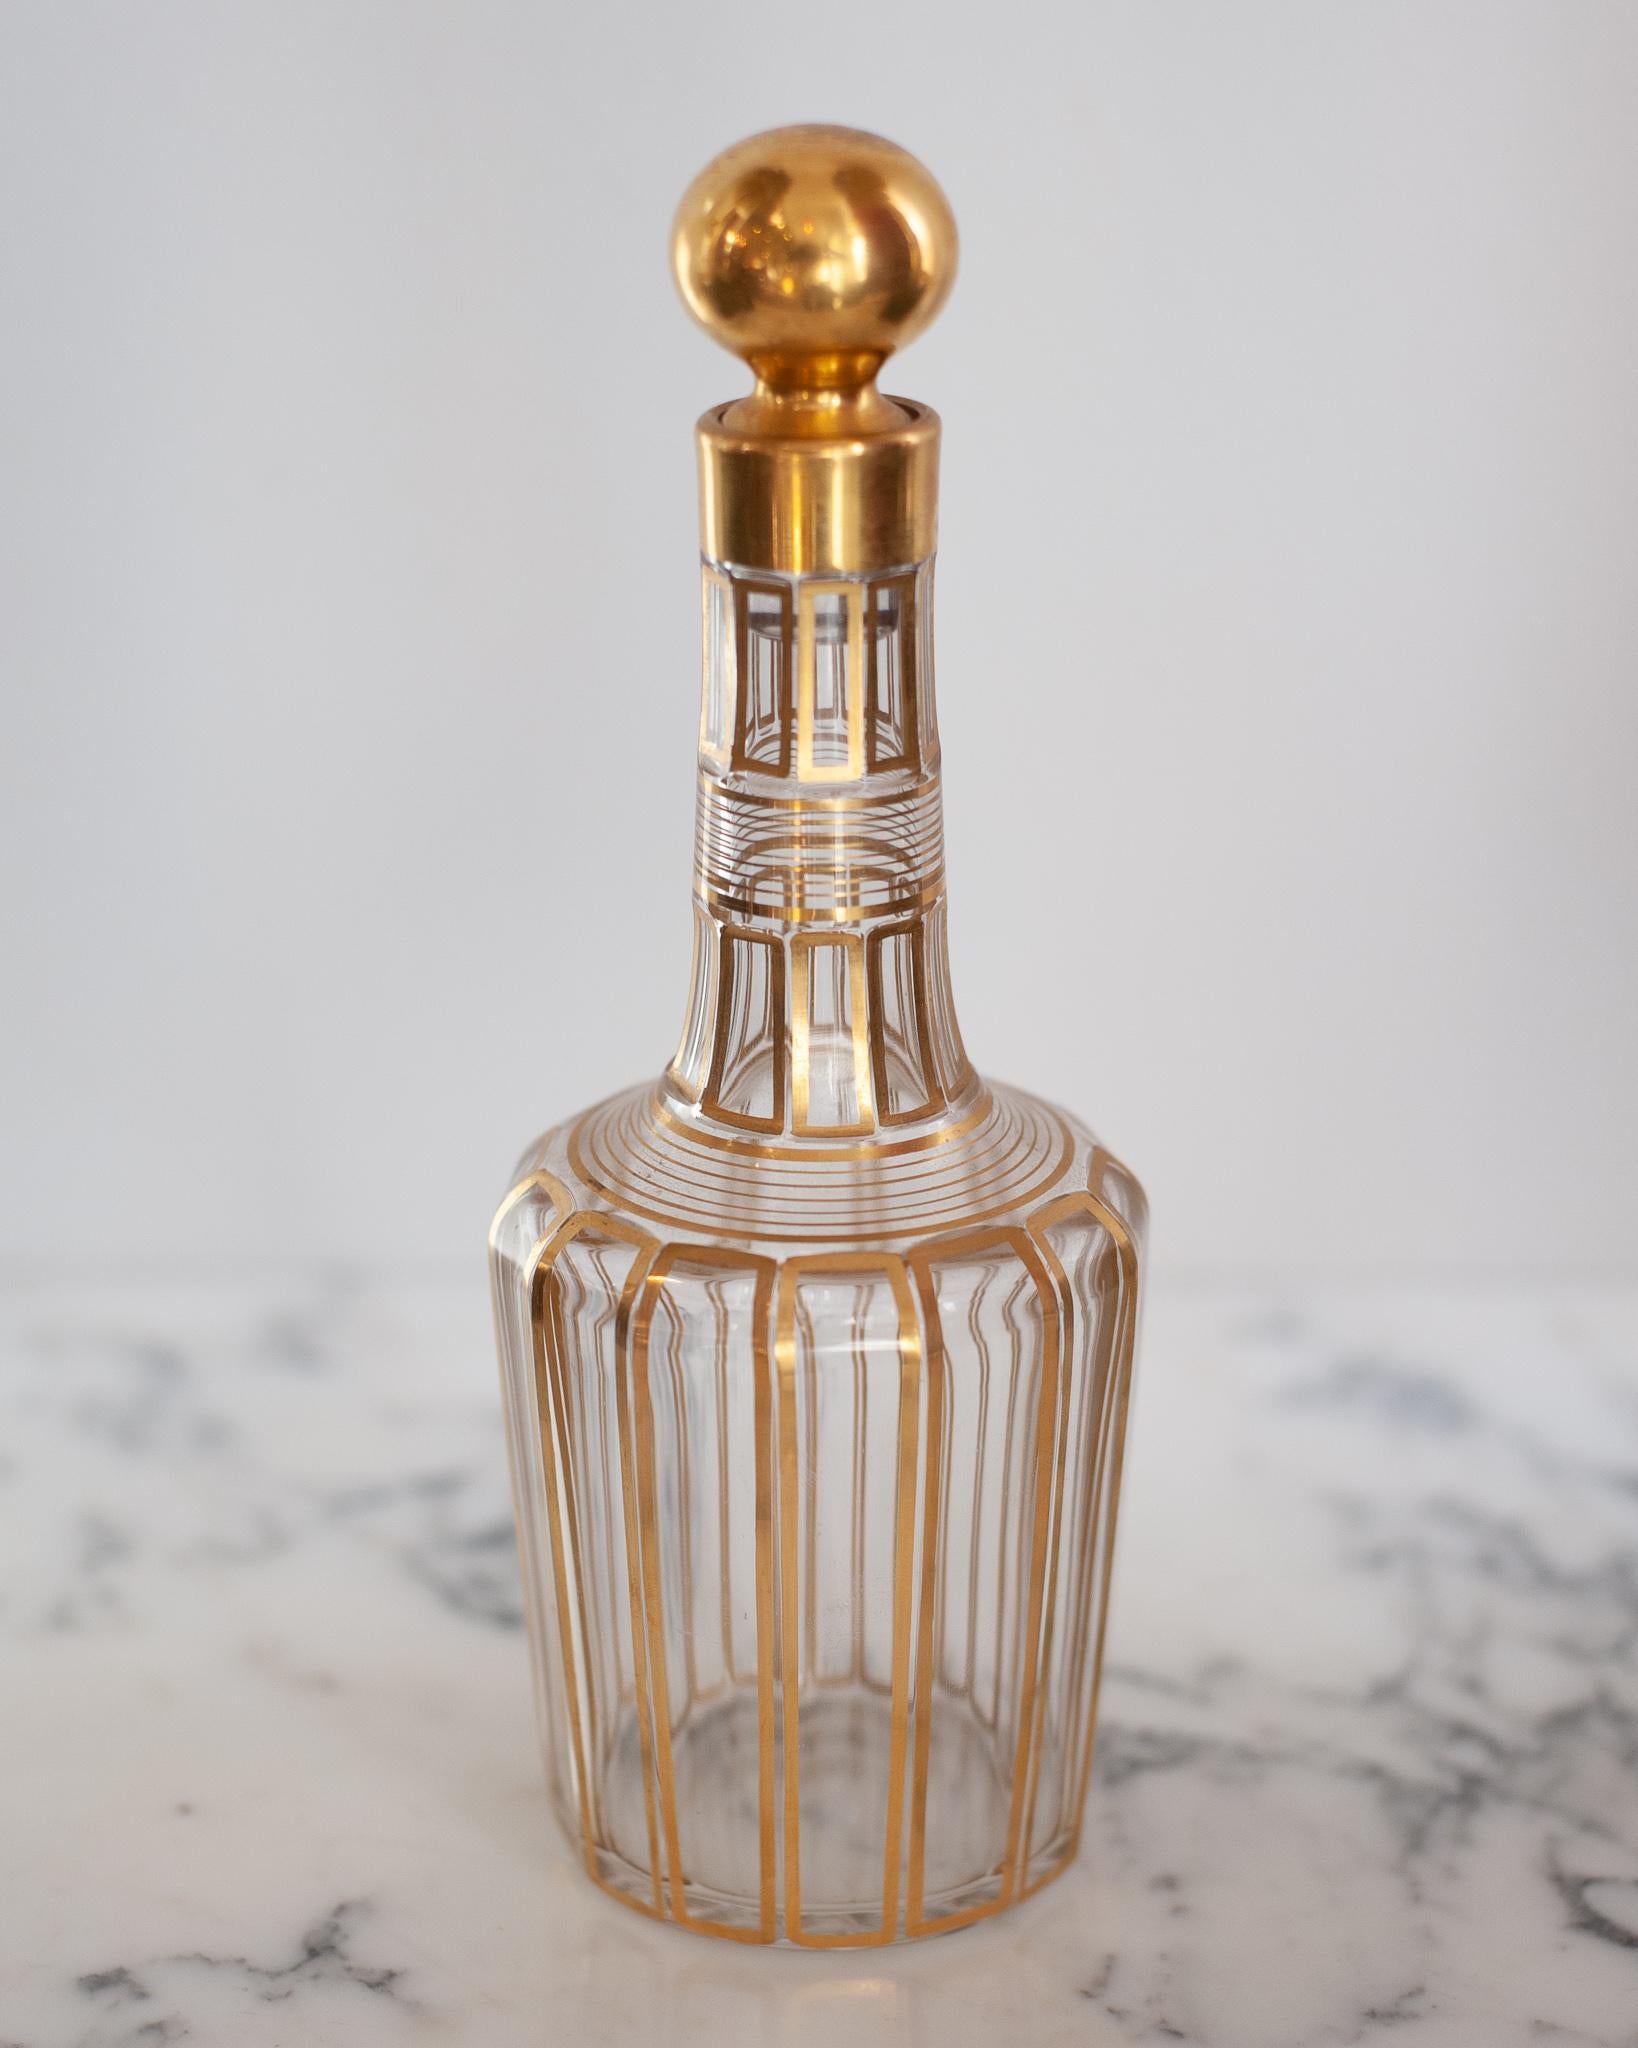 Antique Baccarat Cannelures gilt crystal decanter. This Baccarat design is known as Cannelures Louis XVI, and appeared in the 1916 Baccarat “Catalogue des Arts de la Table